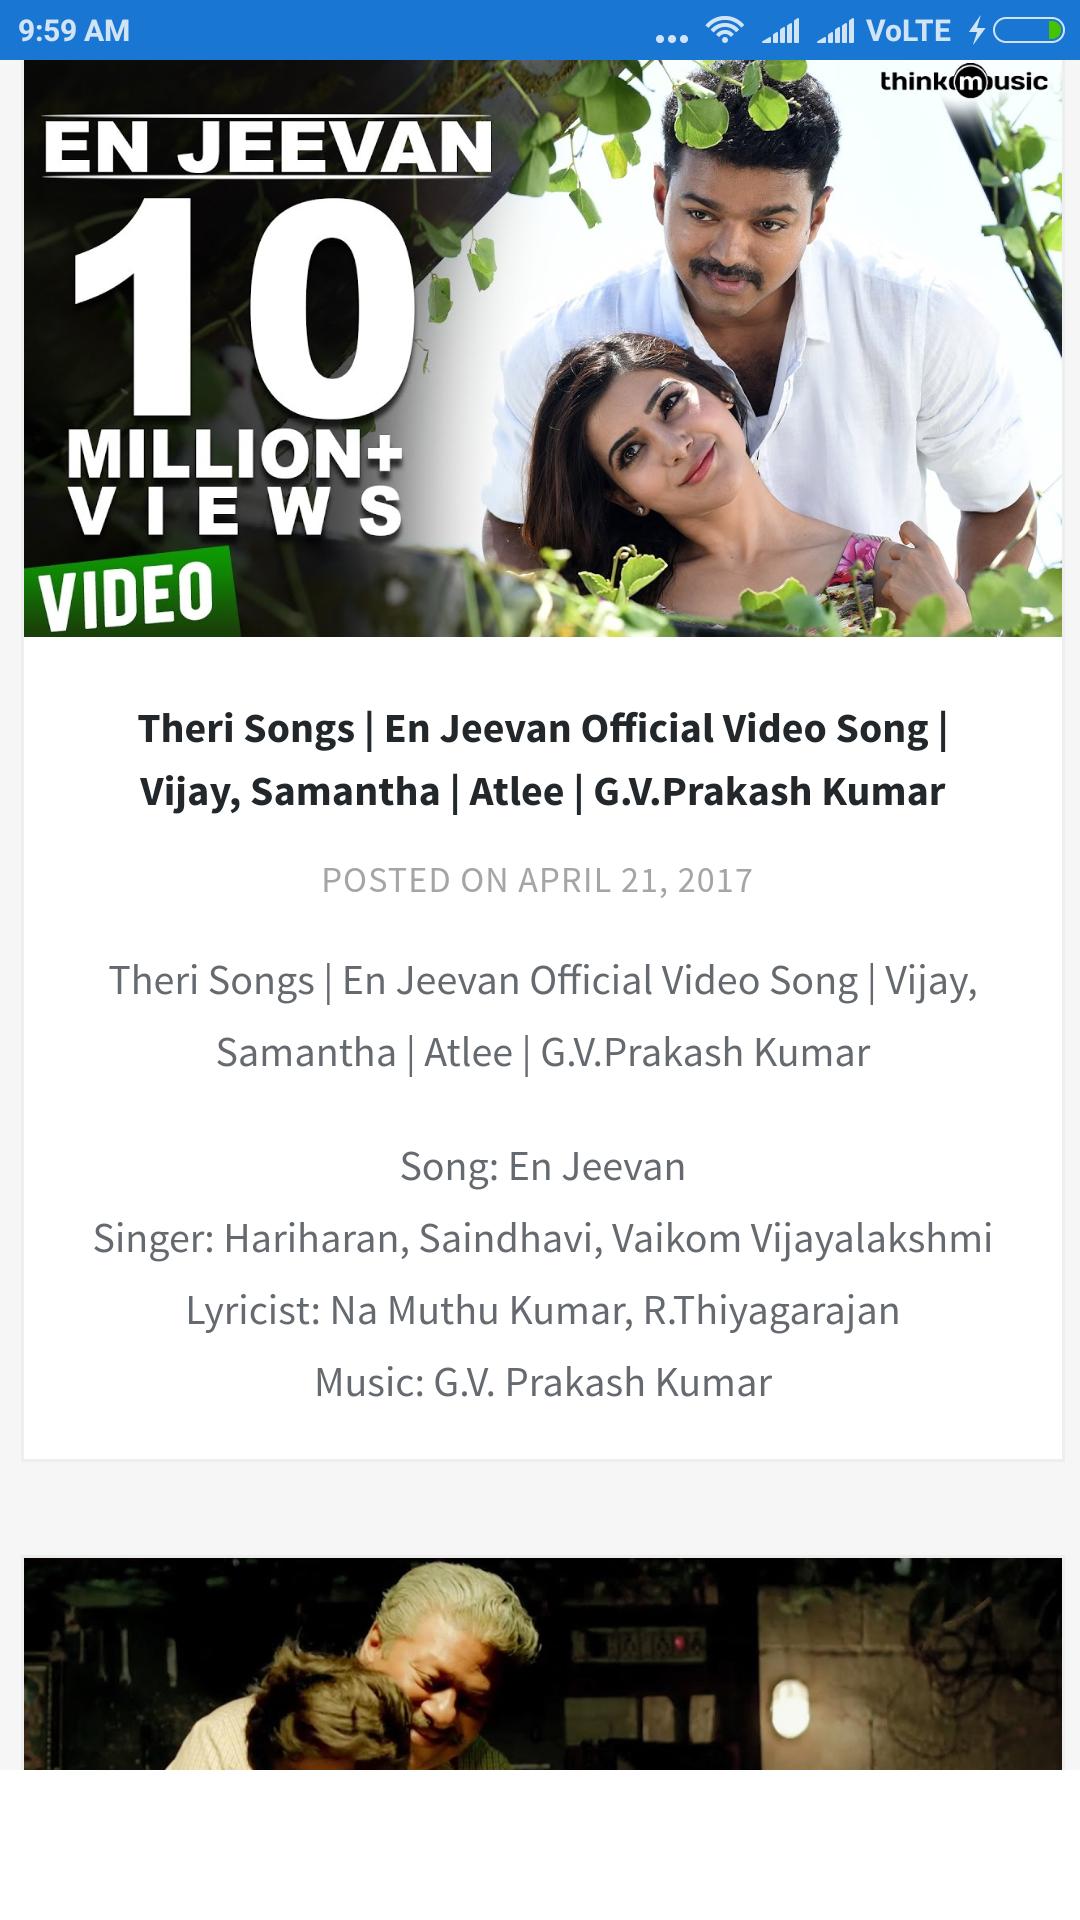 Tamil Songs Video For Android Apk Download Yes, it's easily to get file vaikom vijayalakshmi sings a tamil song in hd quality from mcvideostamil and convert to medium mp3 format hq. tamil songs video for android apk